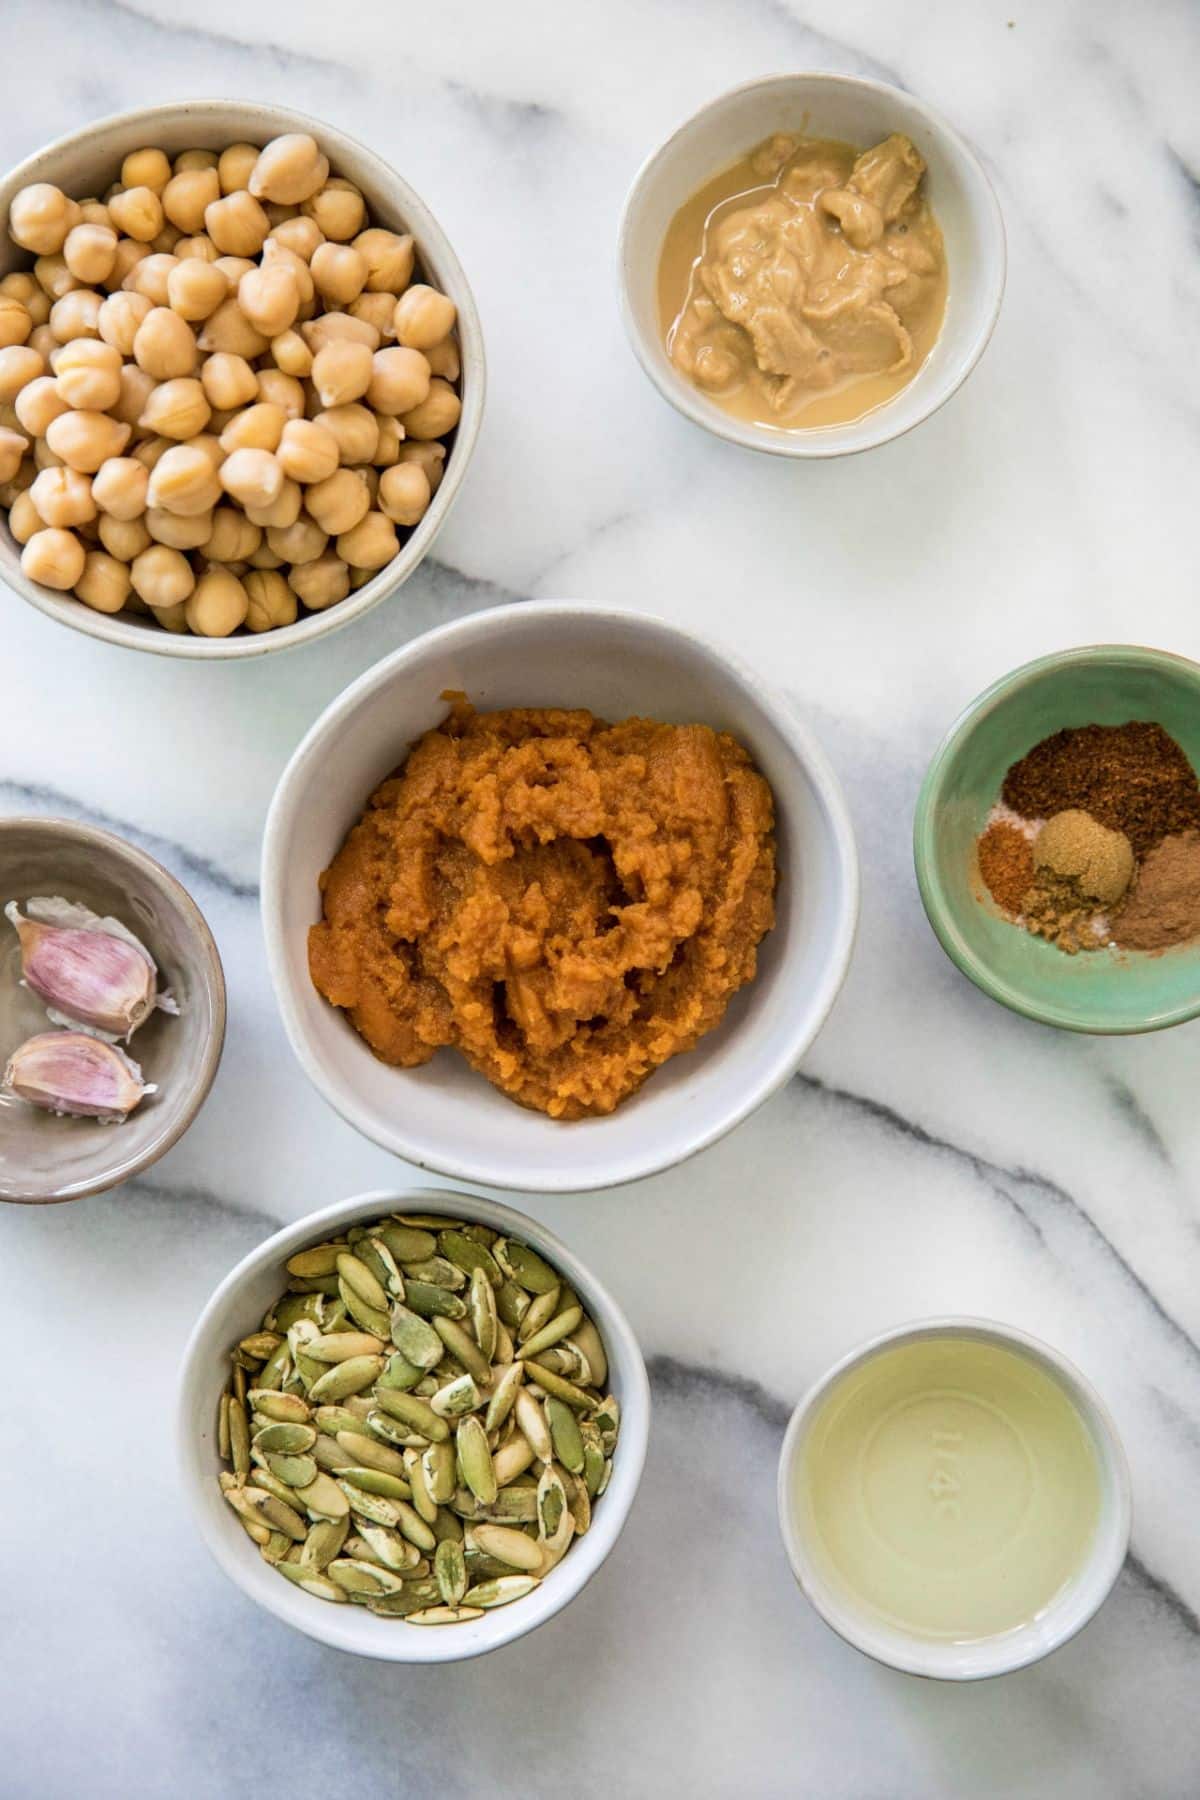 Pumpkin puree, chickpeas, shallots, olive oil and seasonings divided into small bowls.